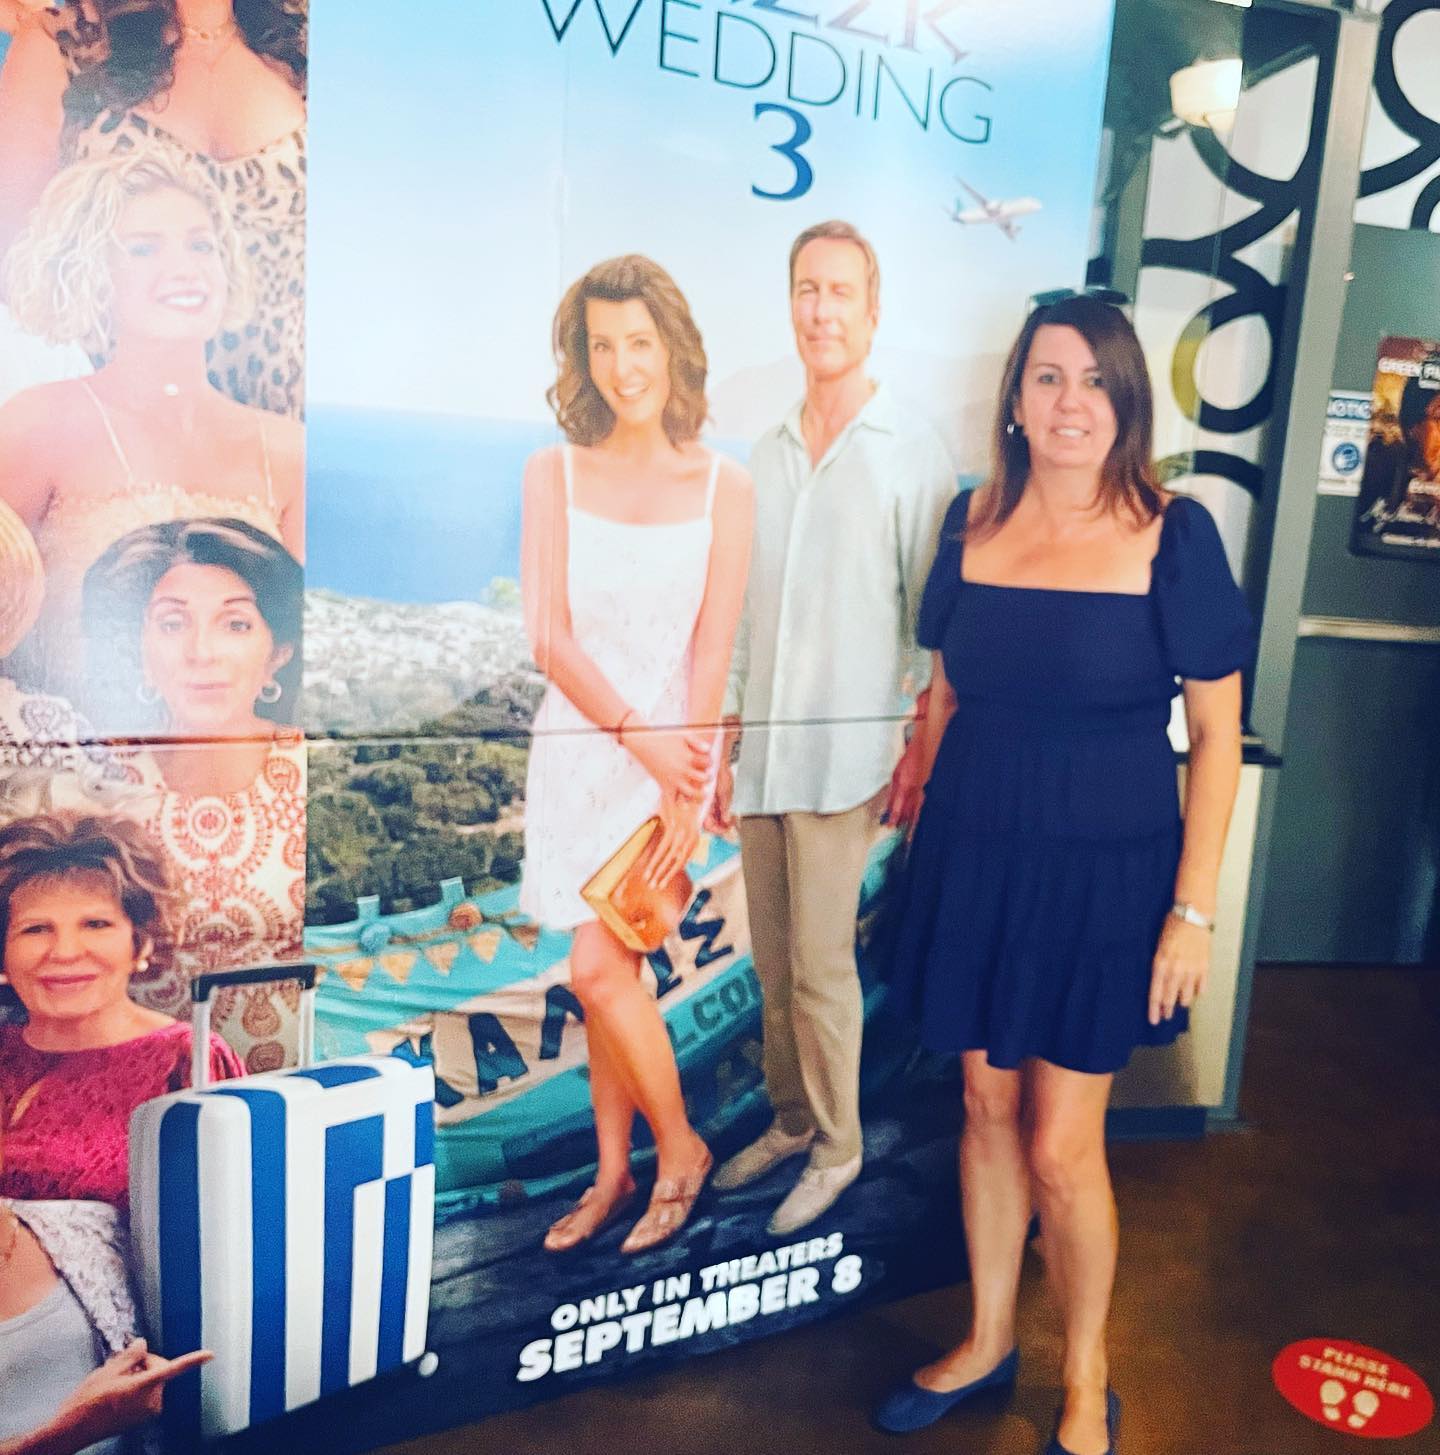 Went to see My Big Fat Greek Wedding 3 brilliant writing &
directing, loved it 💙 The Portokalos family is back! Go Greek or go home…